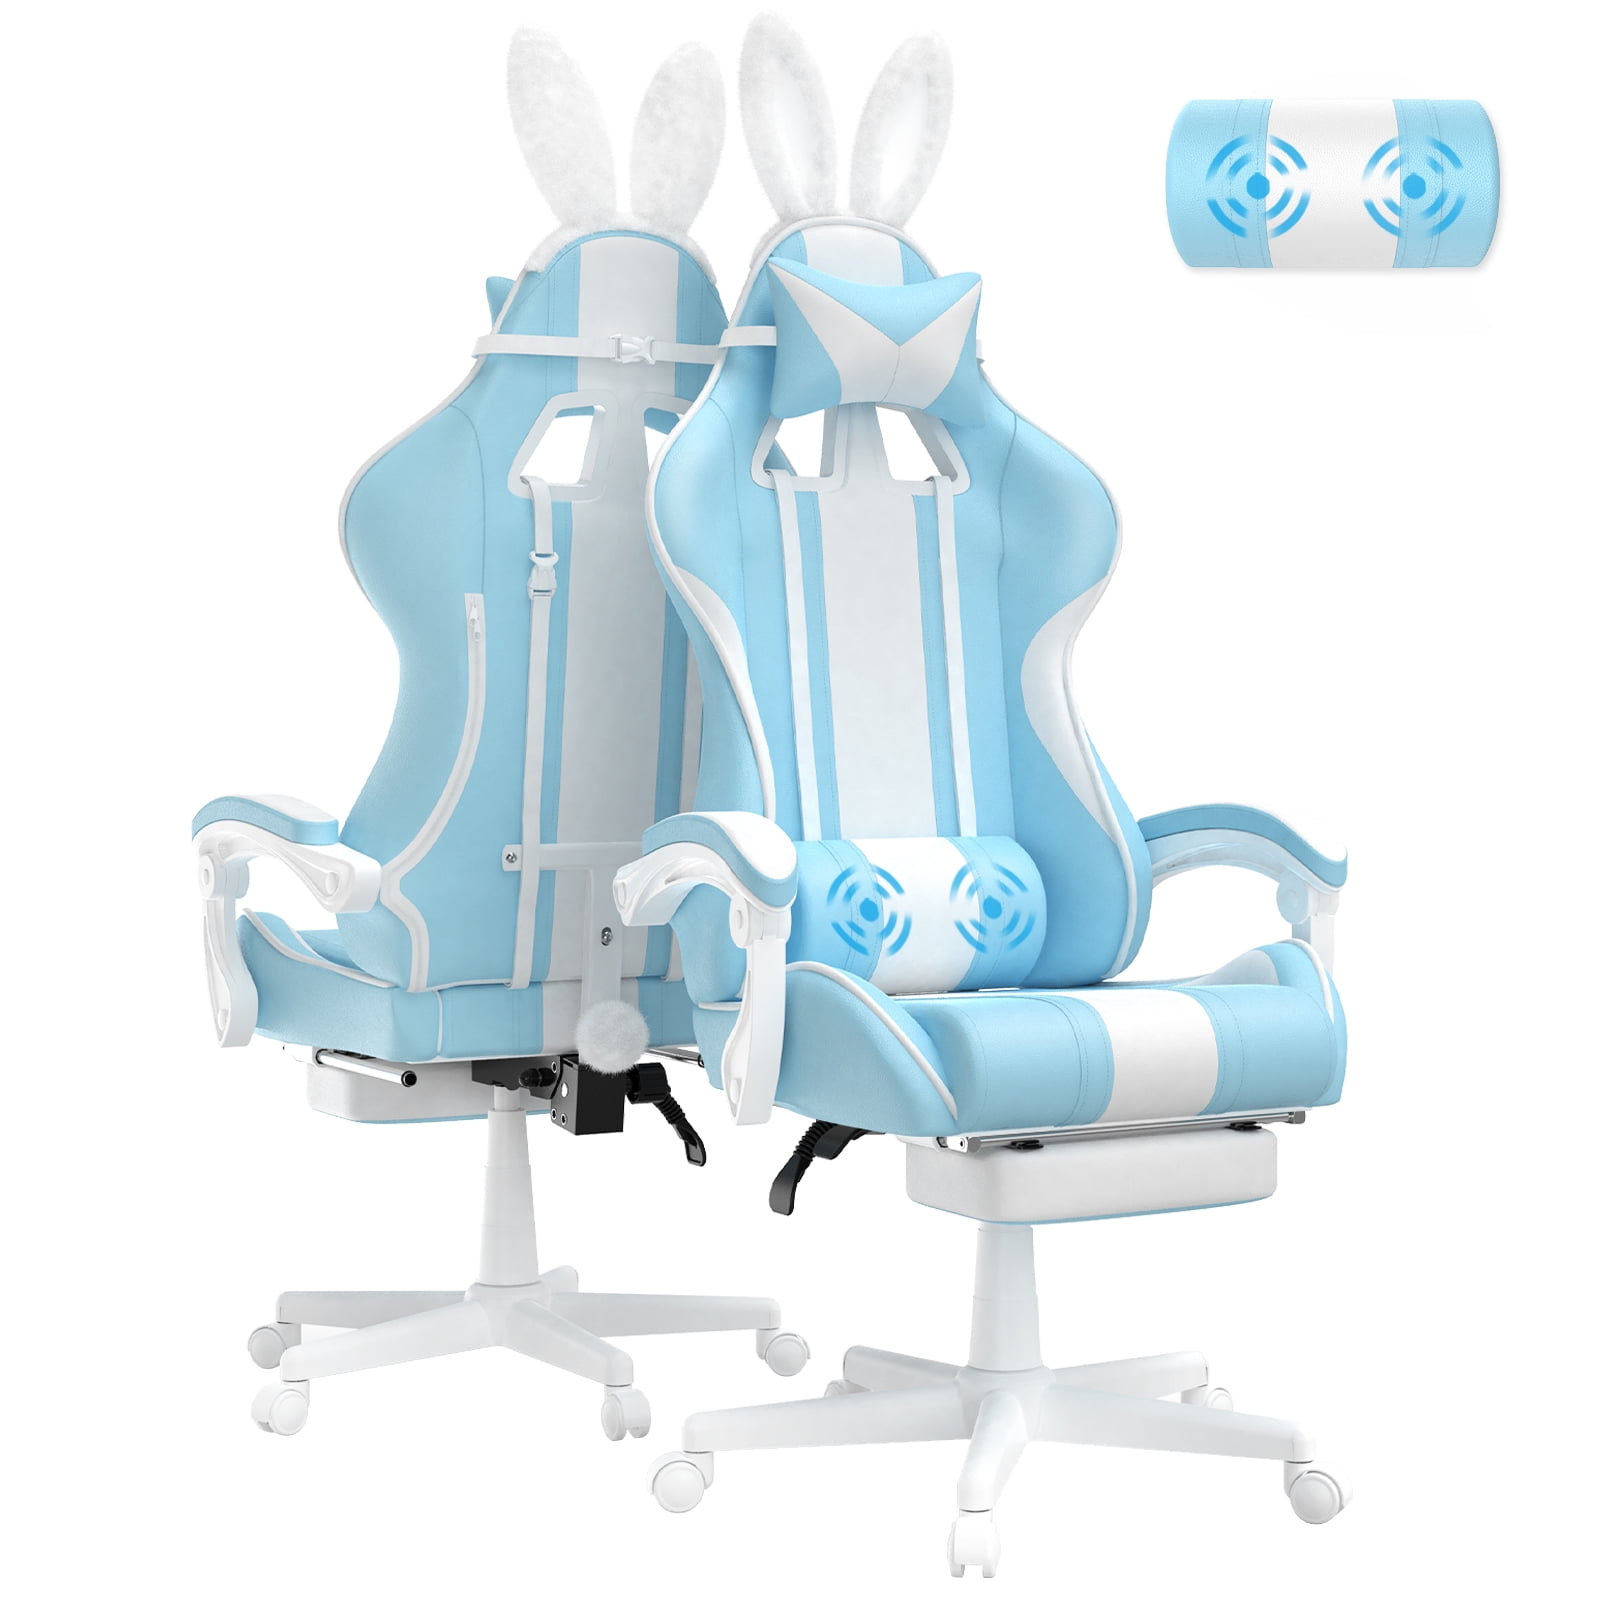 NUOBESTY Office Game Chair for Adults Lumbar Pillow for Couch Plush Desk  Chair Lumbar Support Cushion Bunny Stuffed Animal Back Support Chair Lumbar